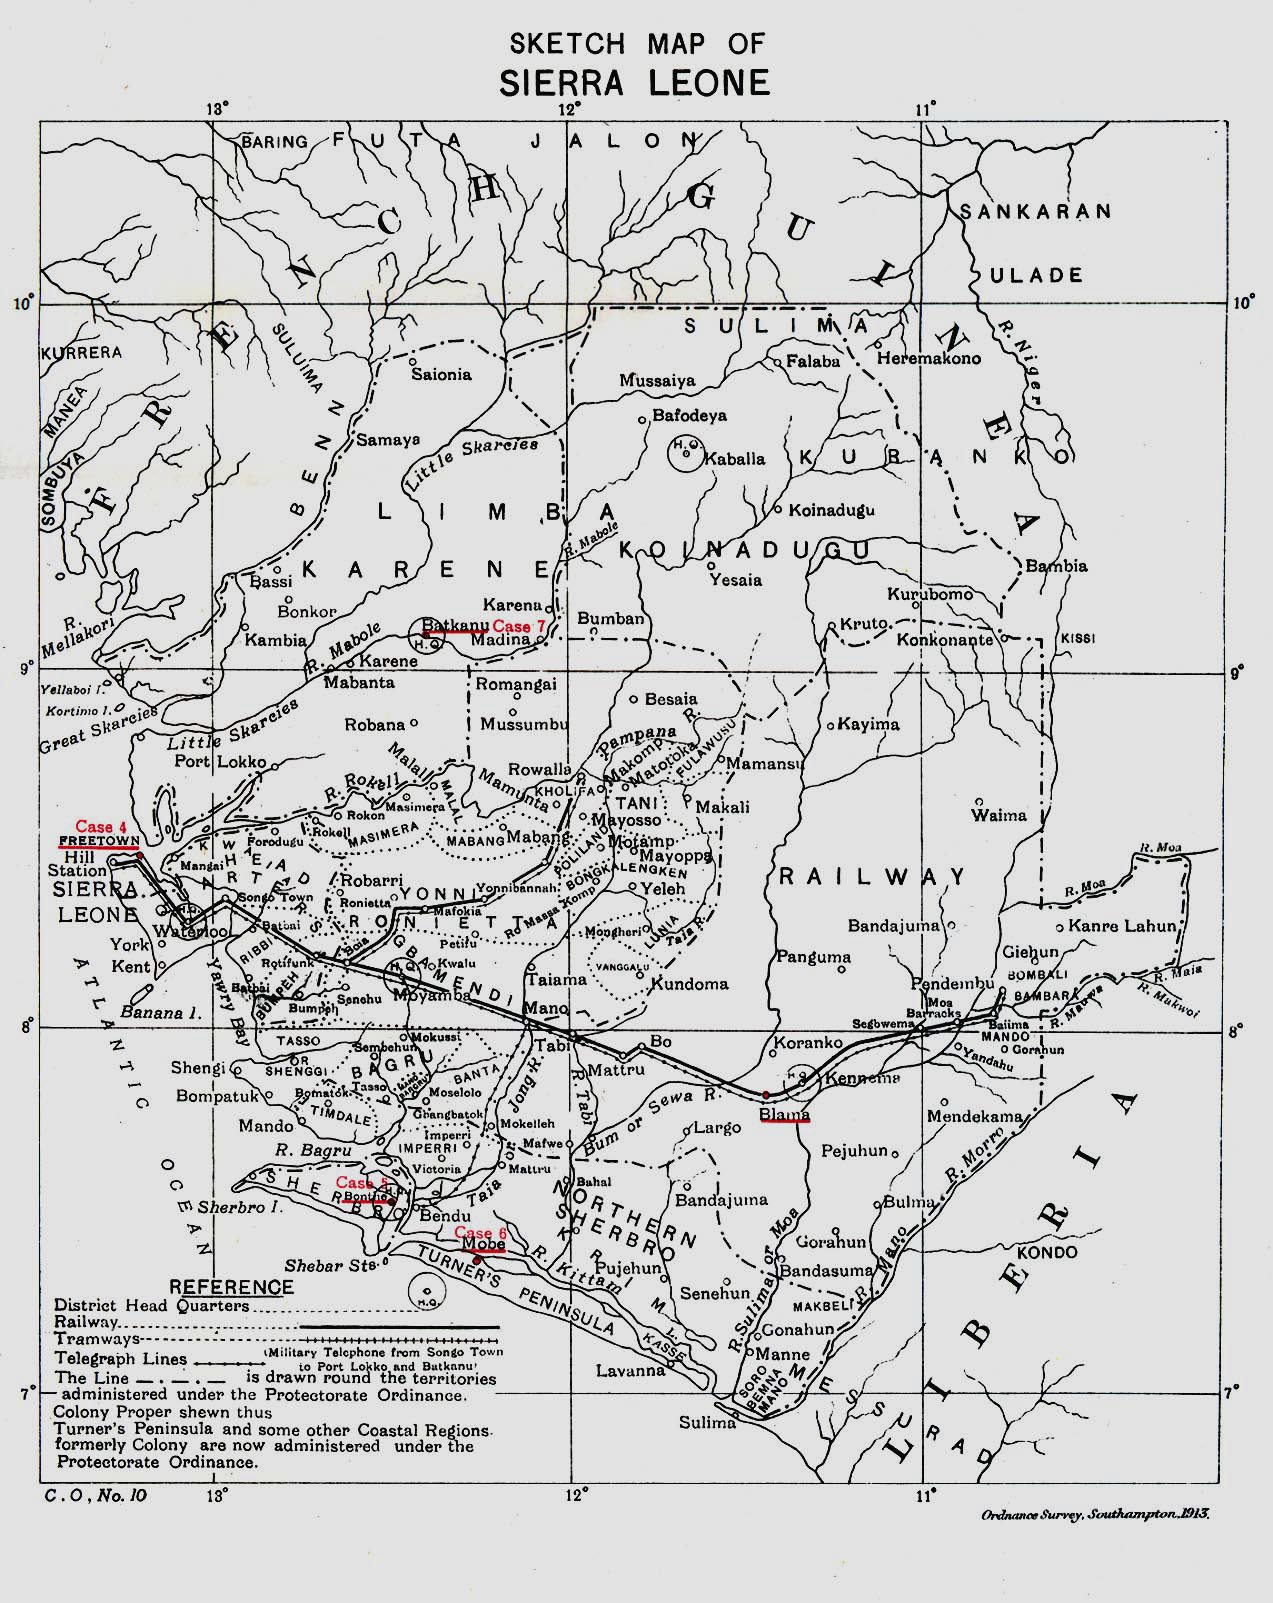 Map Of Sierra Leone Sierra Leone 1913 "Sketch Map of Sierra Leone" from Great Britain Parliament House of Commons Sessional Papers, Colonial Reports - Annual. No. 797, 1913. (516K) 